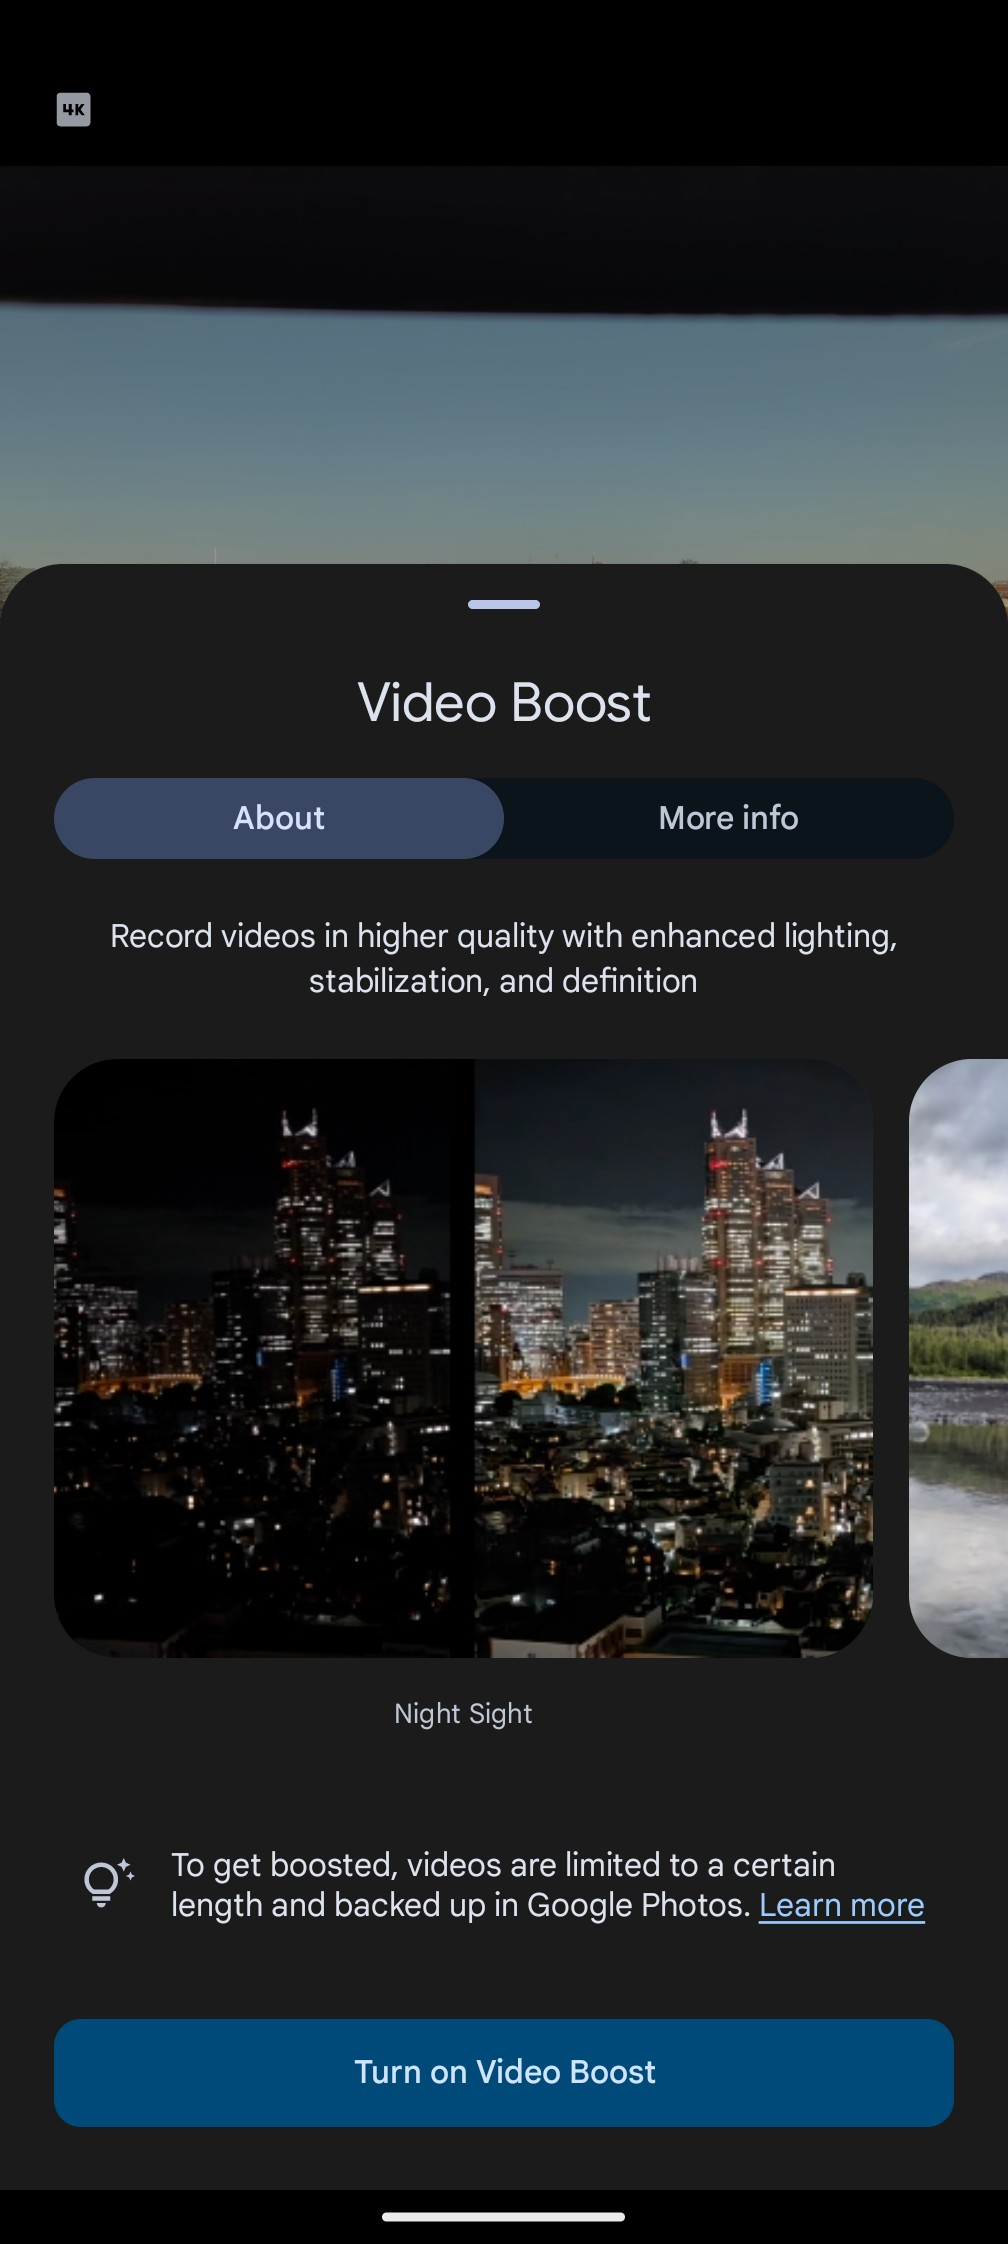 Screenshot of a tip sheet showing how Video Boost works, mentioning things like higher quality with enhanced lighting, stability, and definition. There's an image showing the improvement using Night Sight on a nighttime skyline scene